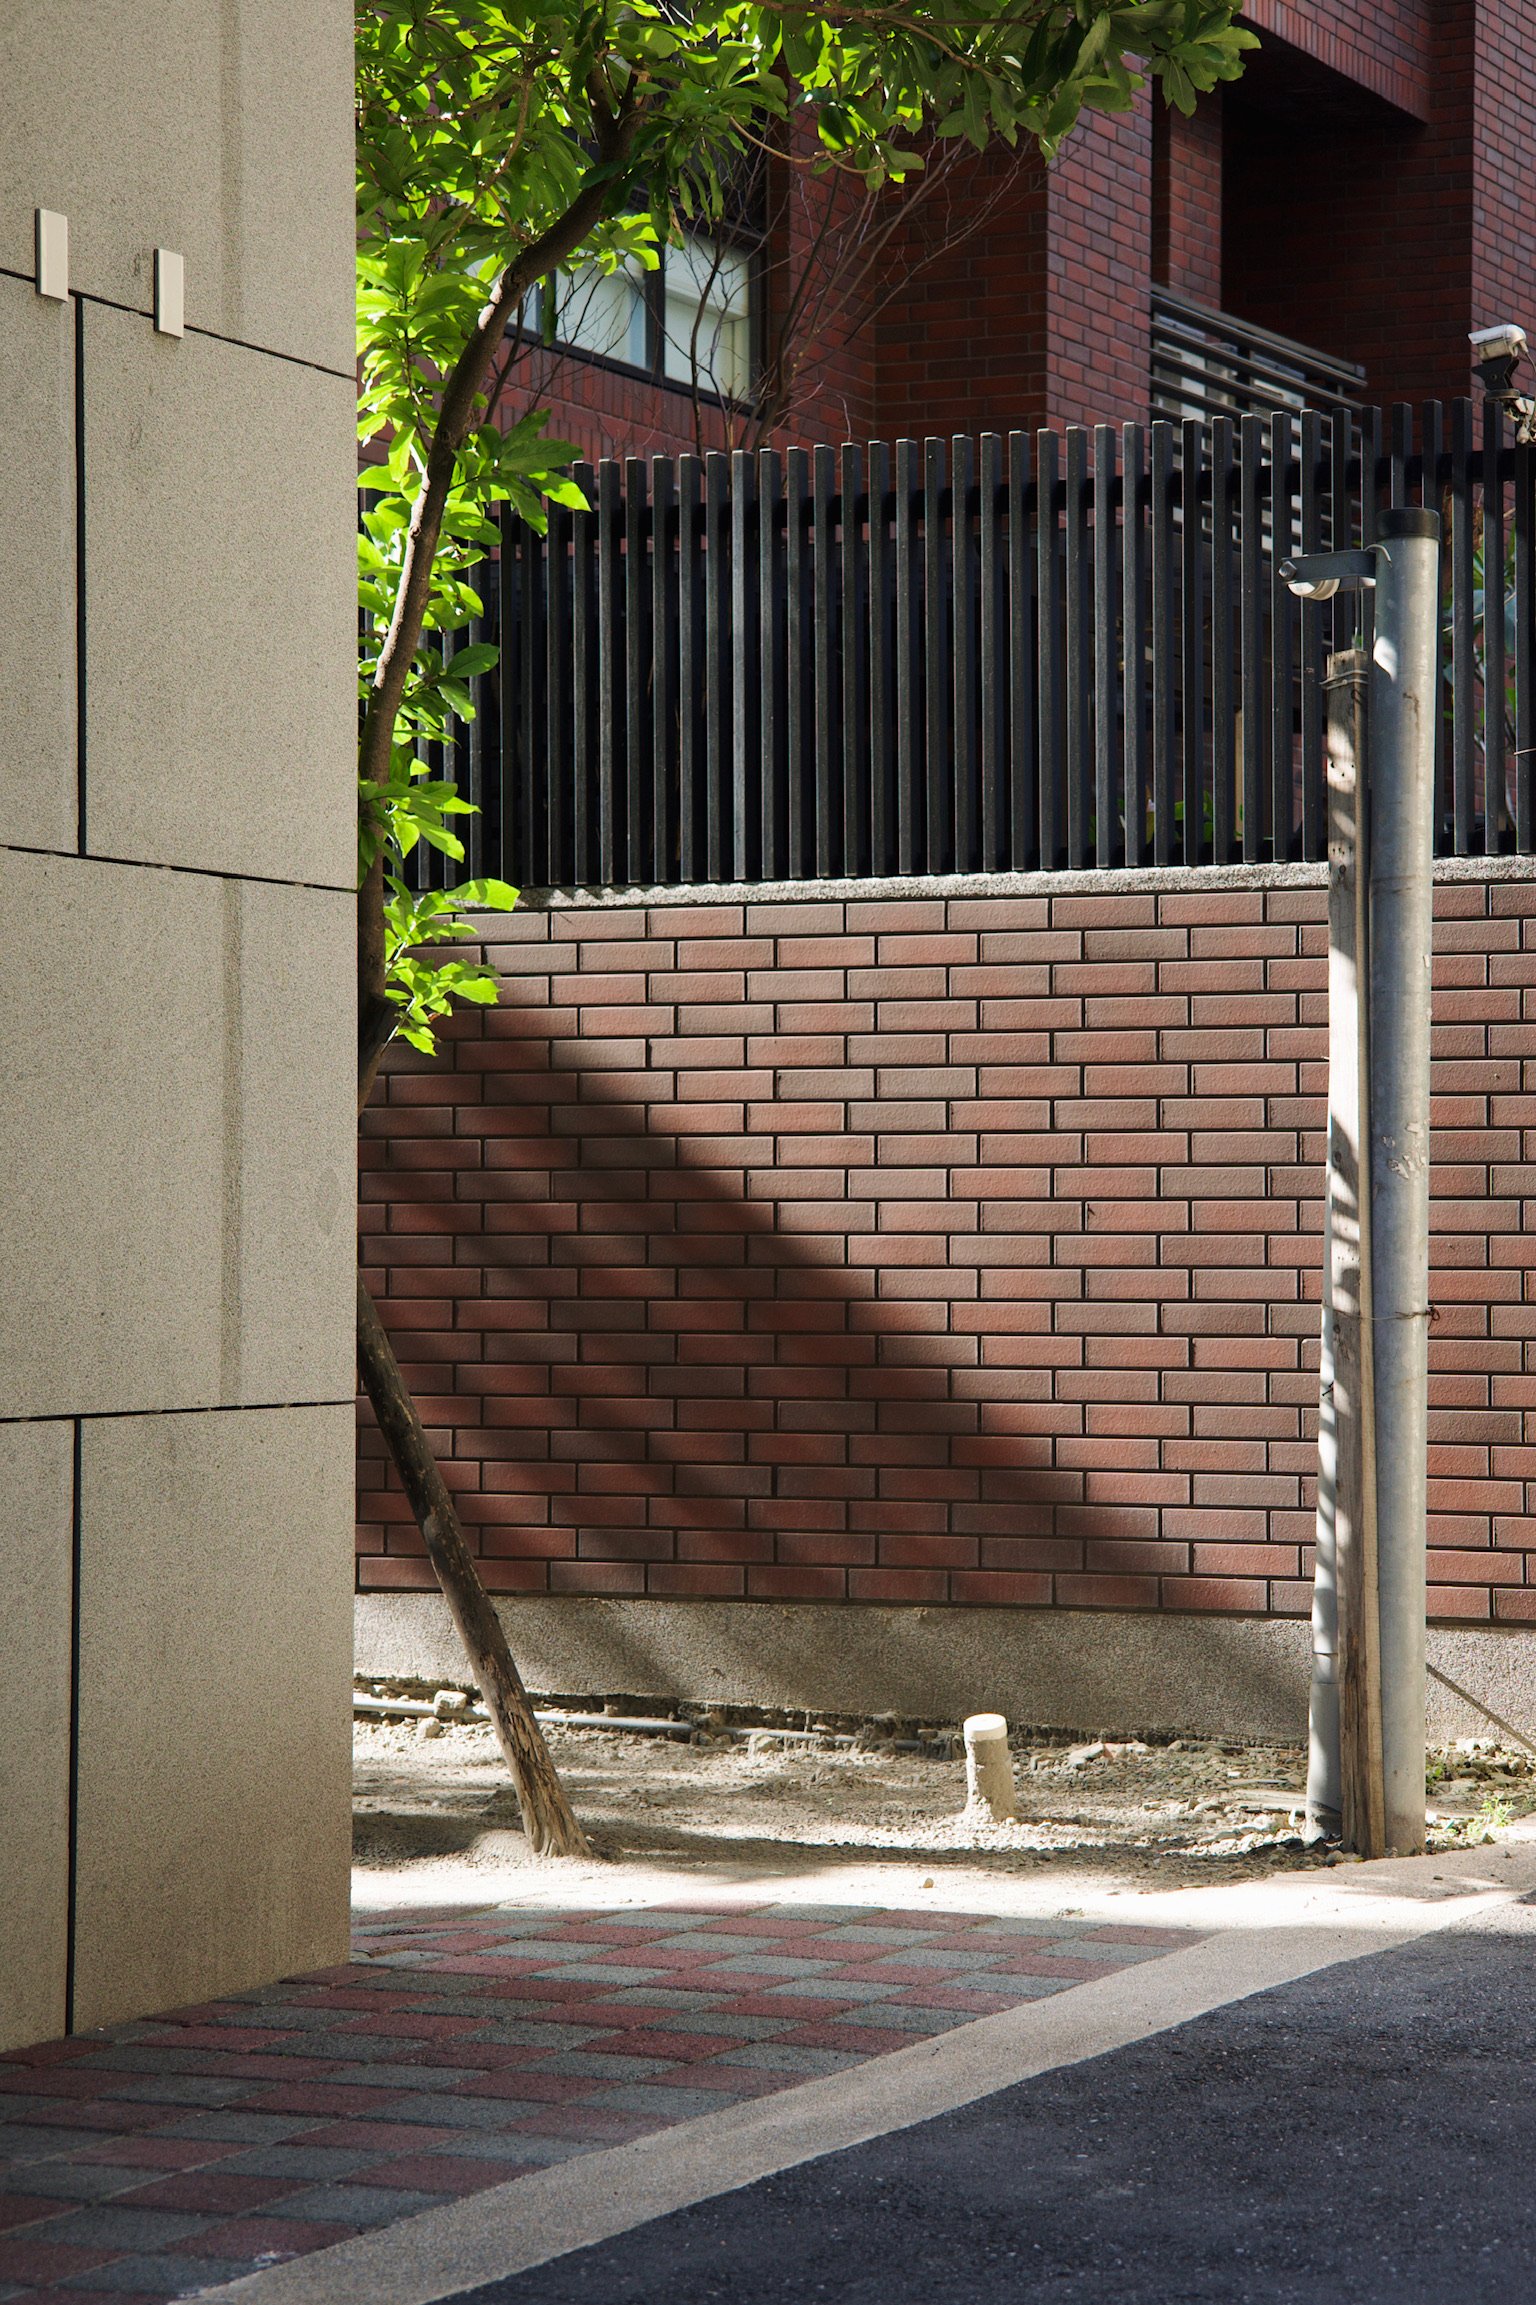 Brick wall with shadow of a tree casted upon it. An electric pole at the edge of the frame, and in the foreground a corner of a building with large-sized beige tiles.